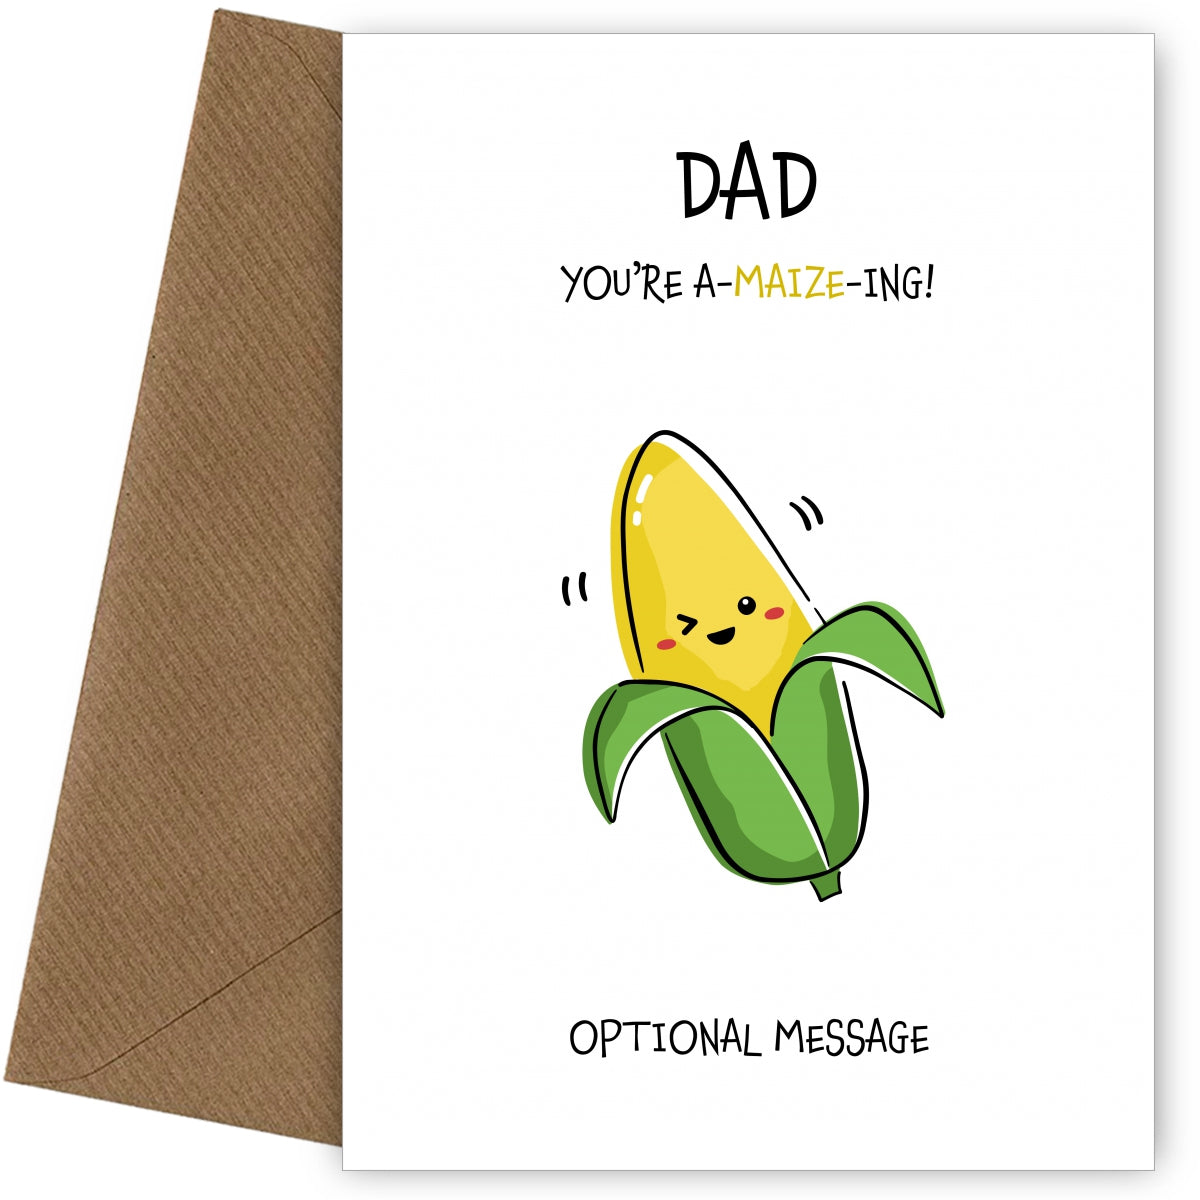 Amazing Birthday Card for Dad - You're A-Maize-ing